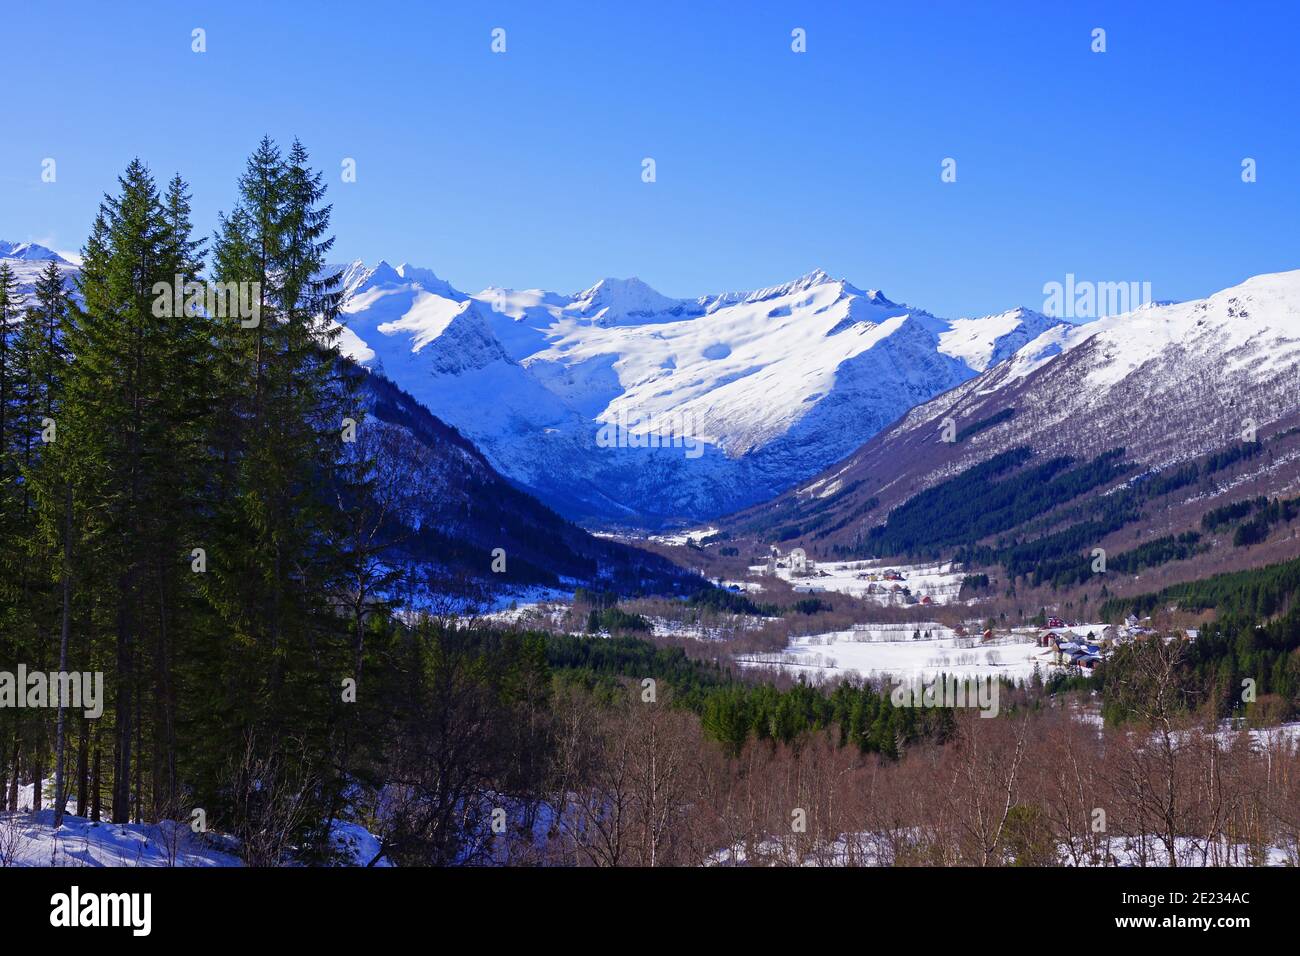 Early spring in the Sunnmøre Alps near the village Sykkylven, close to Ålesund, Norway. Stock Photo